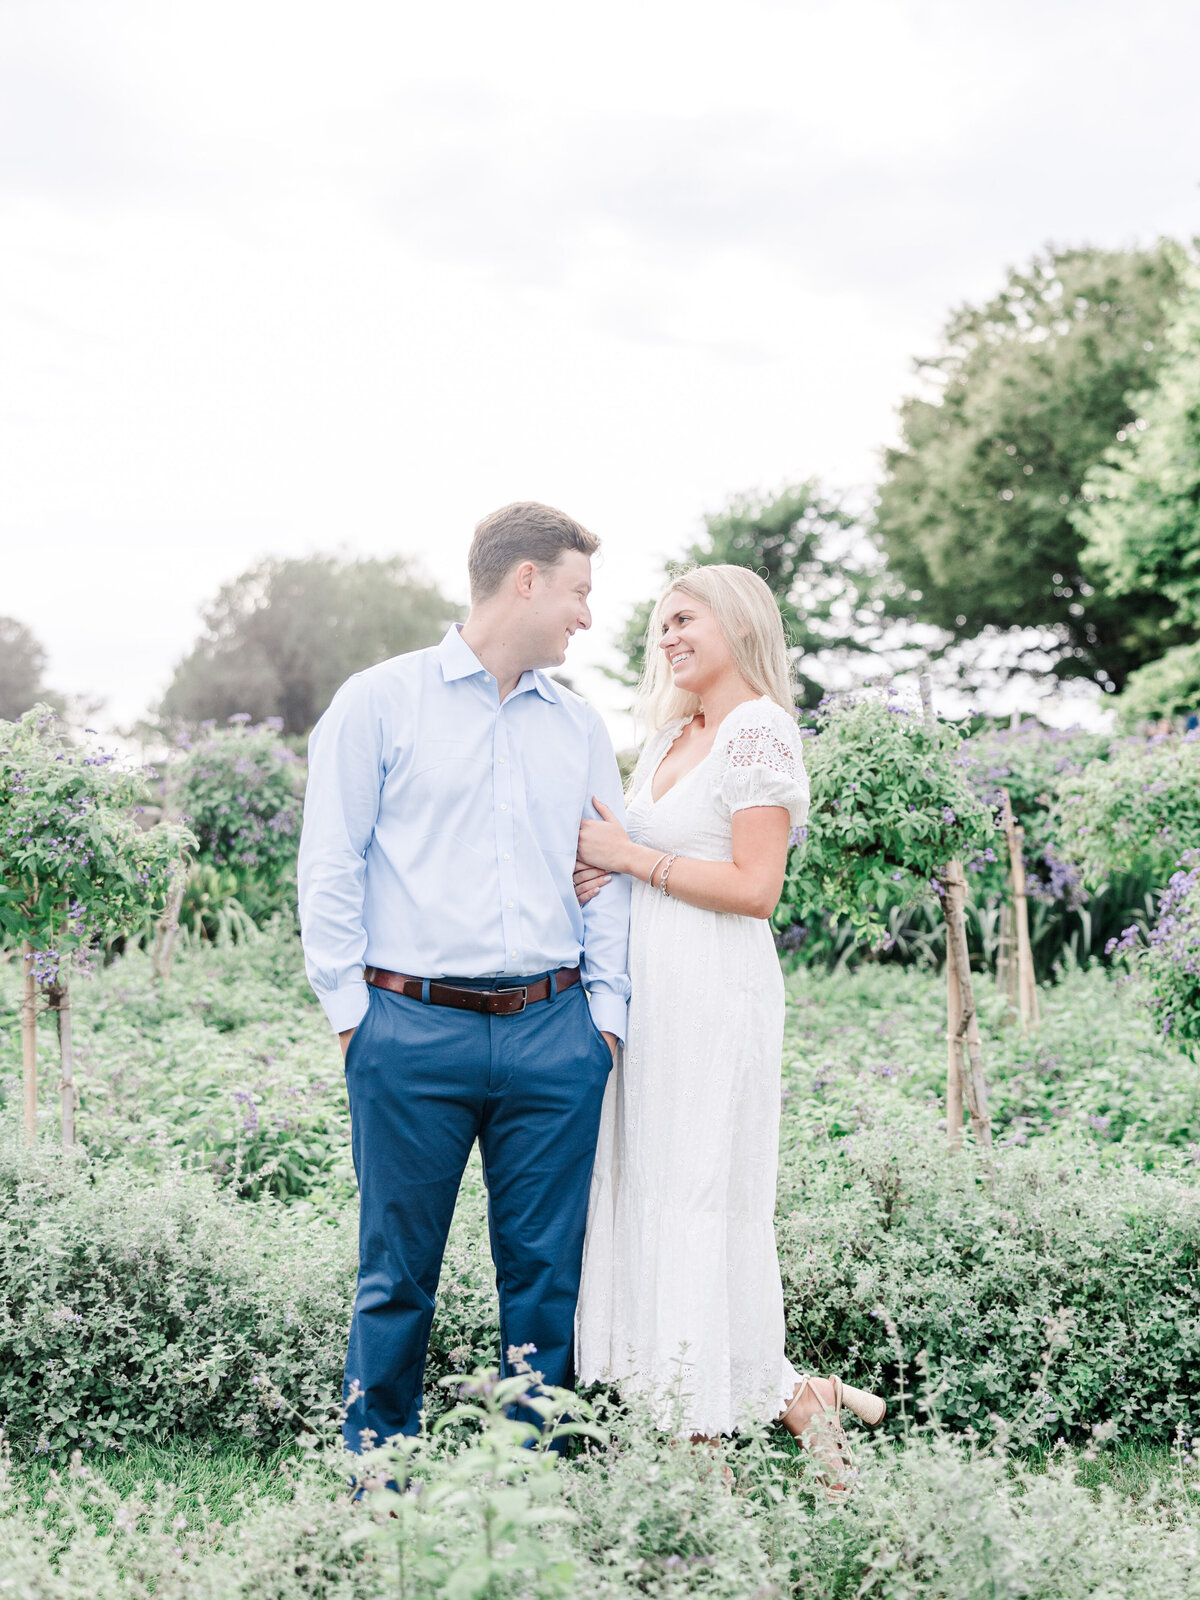 christine-antonio-engagement-session-eolia-mansion-harkness-park-waterford-ct-53